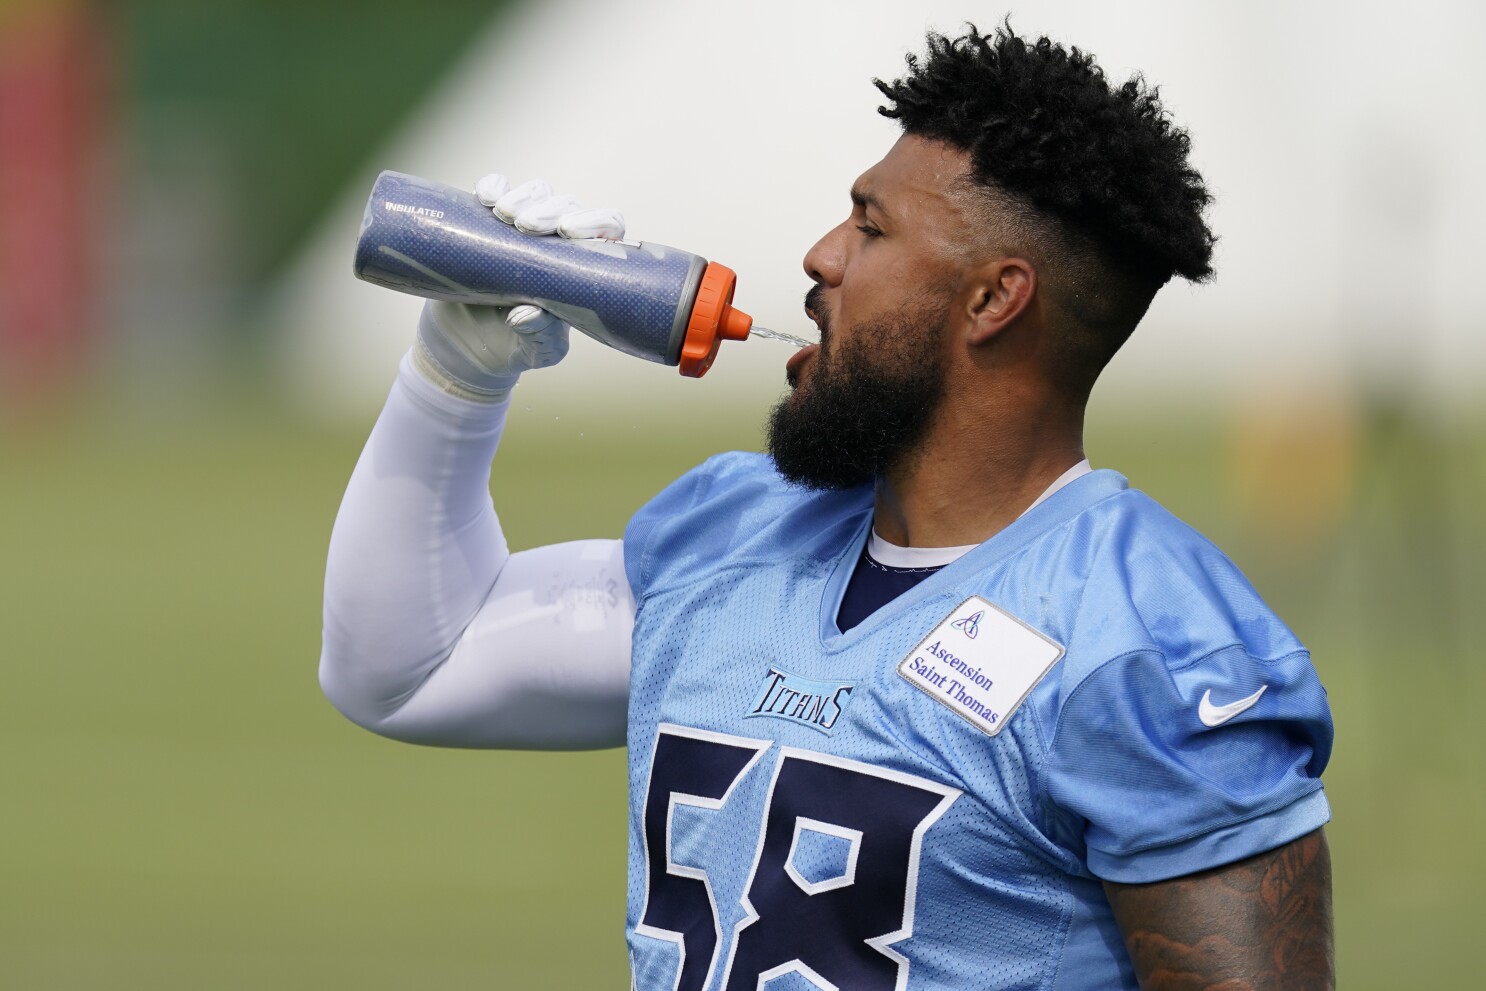 Simmons questions whether Titans can pay what he thinks he's worth, Titans